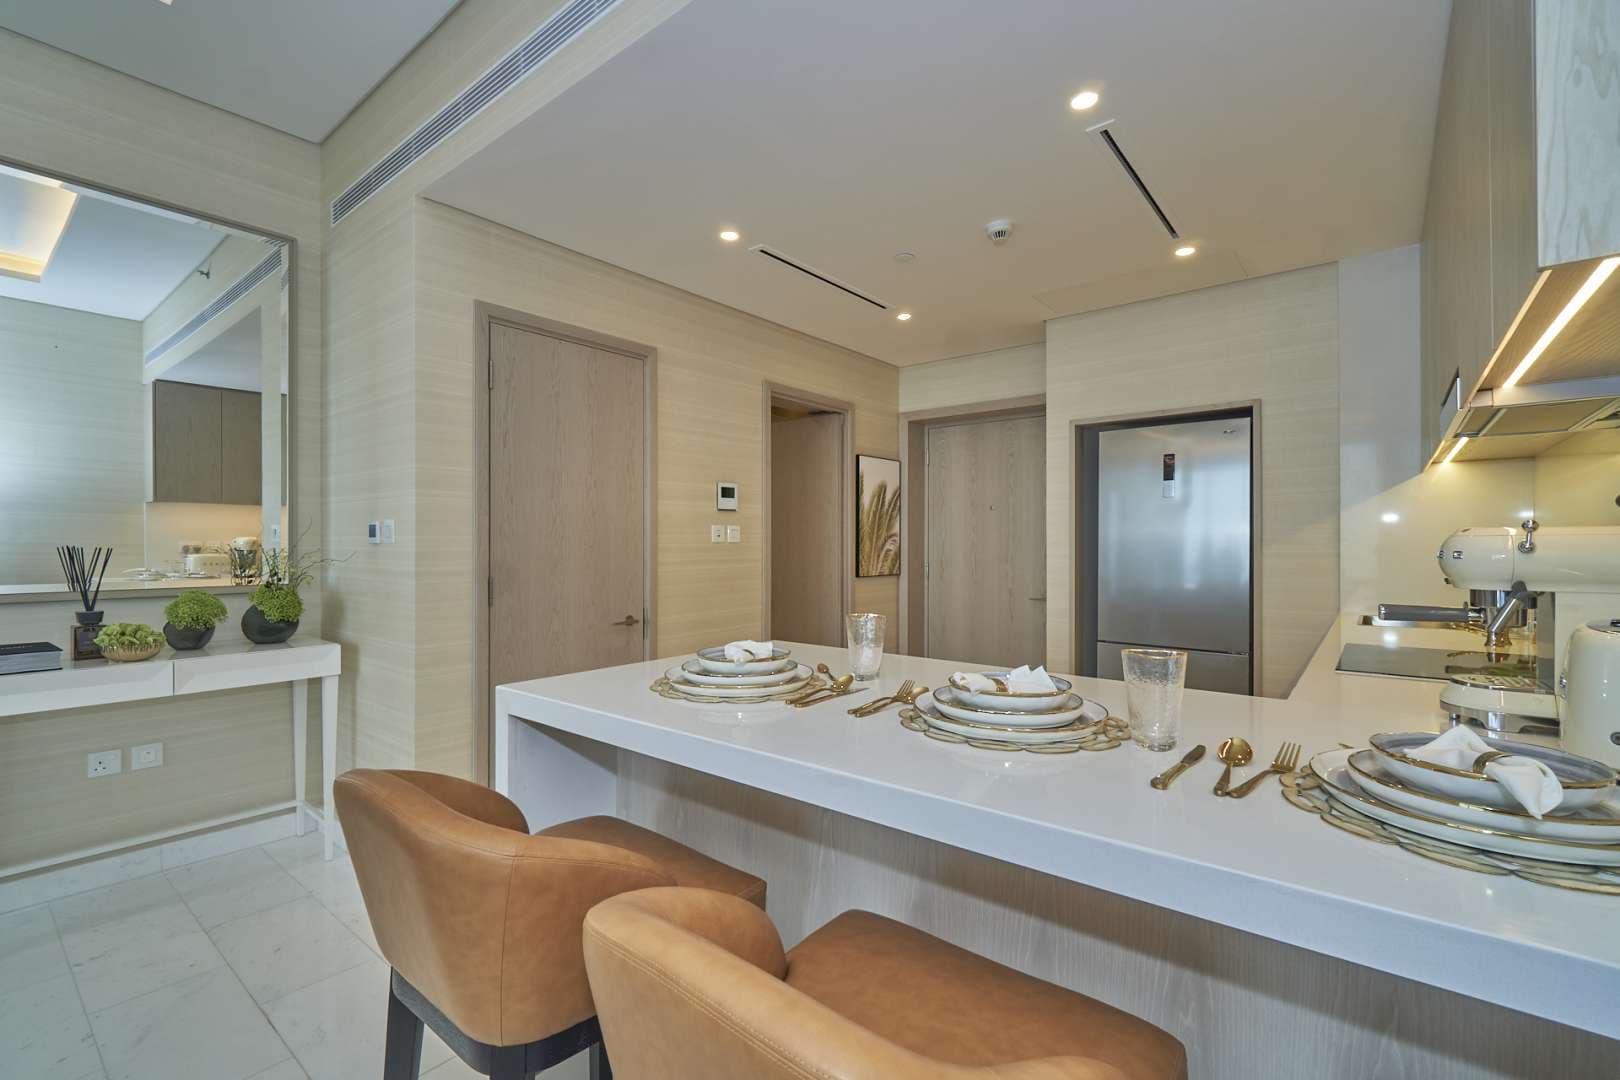 1 Bedroom Apartment For Sale The Palm Tower Lp07265 2449f2147f9d7800.jpg